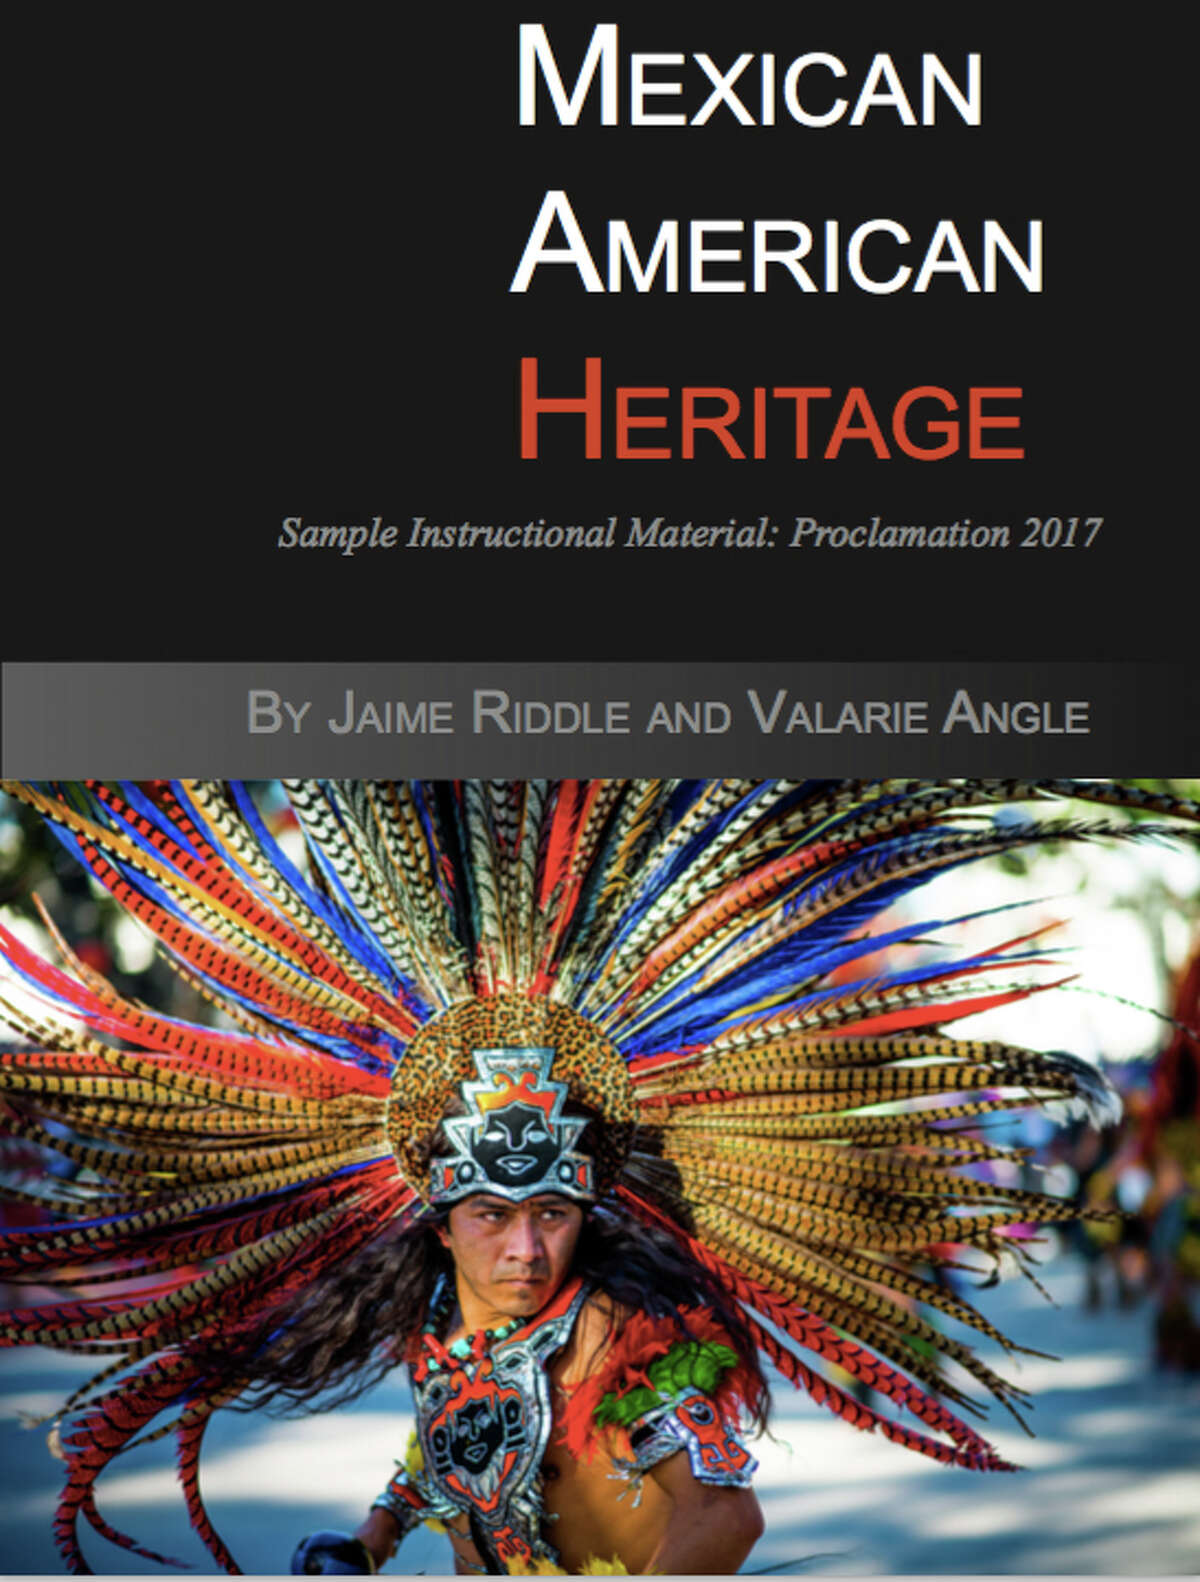 The controversial textbook, "Mexican American Heritage," was published by Momentum Instruction, a company headed by former SBOE member Cynthia Dunbar.